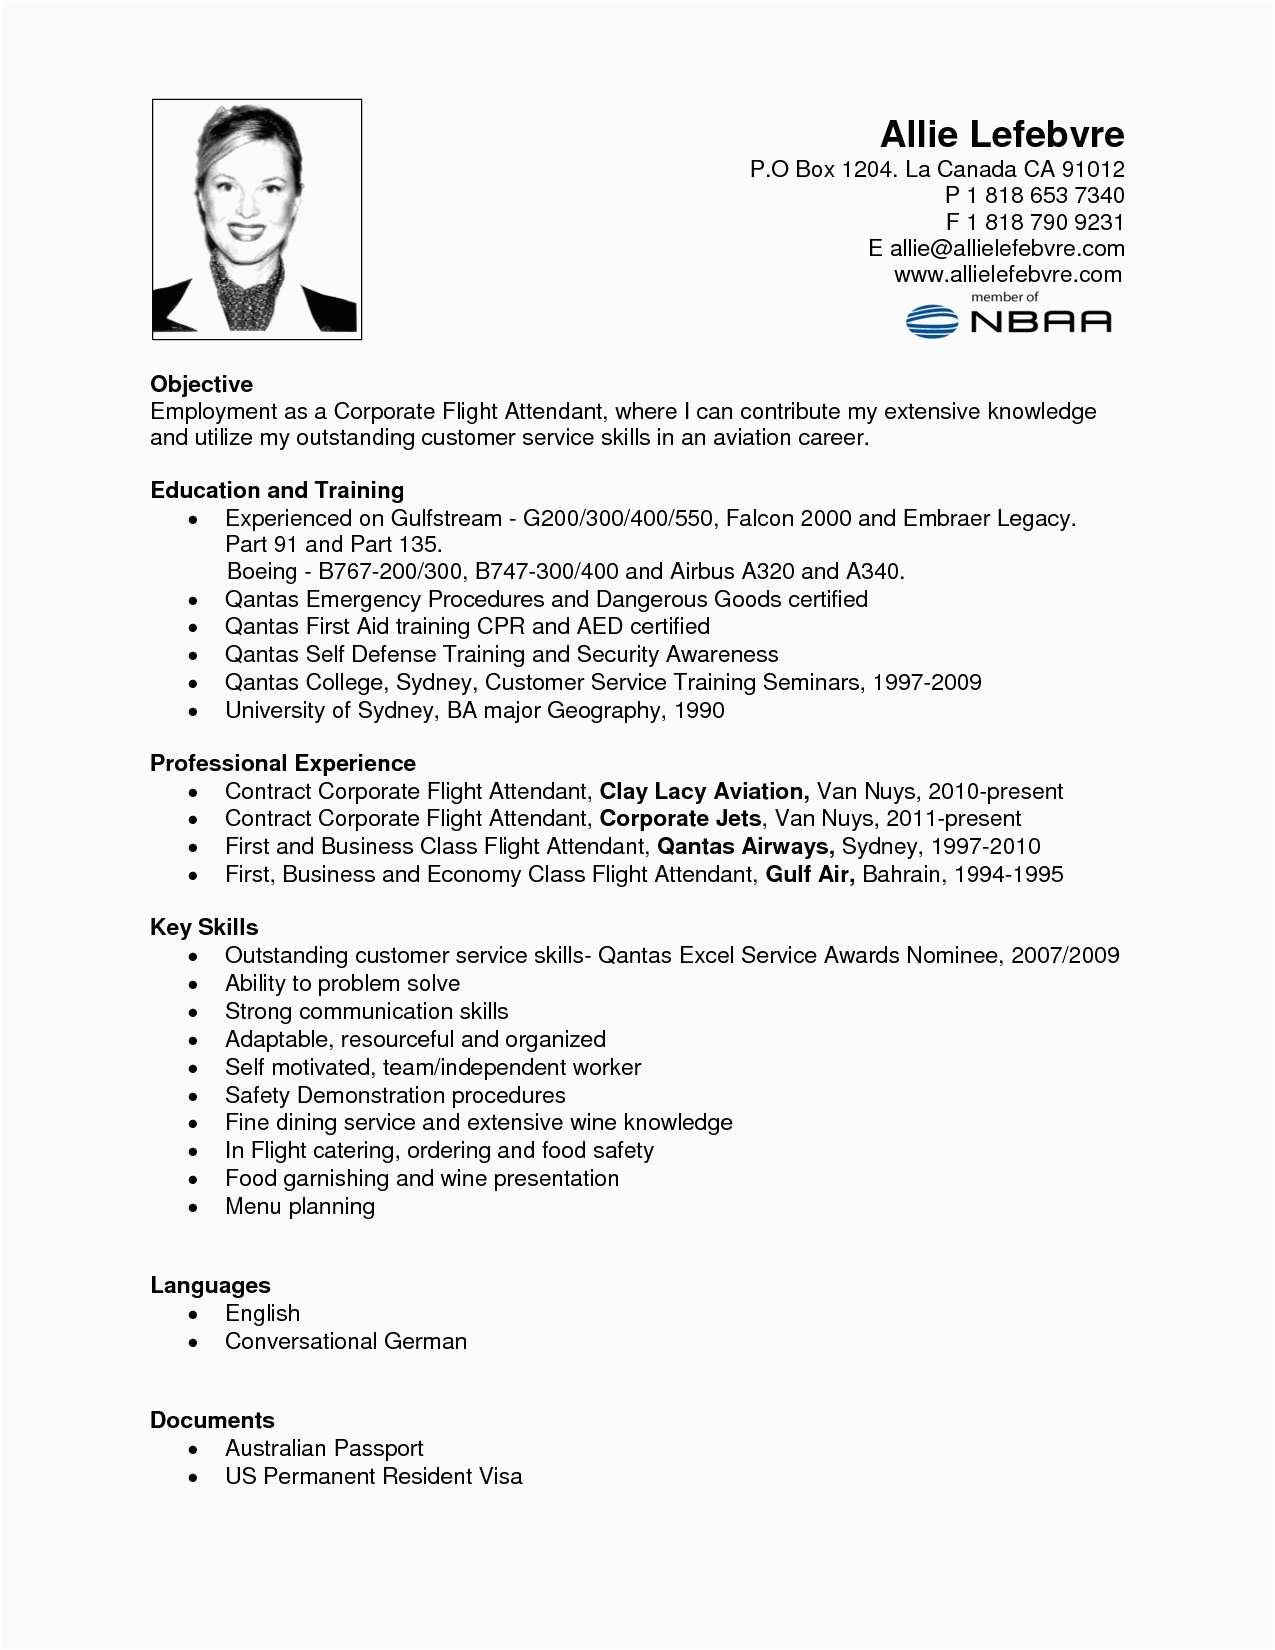 Resume Sample for Flight attendant with No Experience Flight attendant Resume Sample